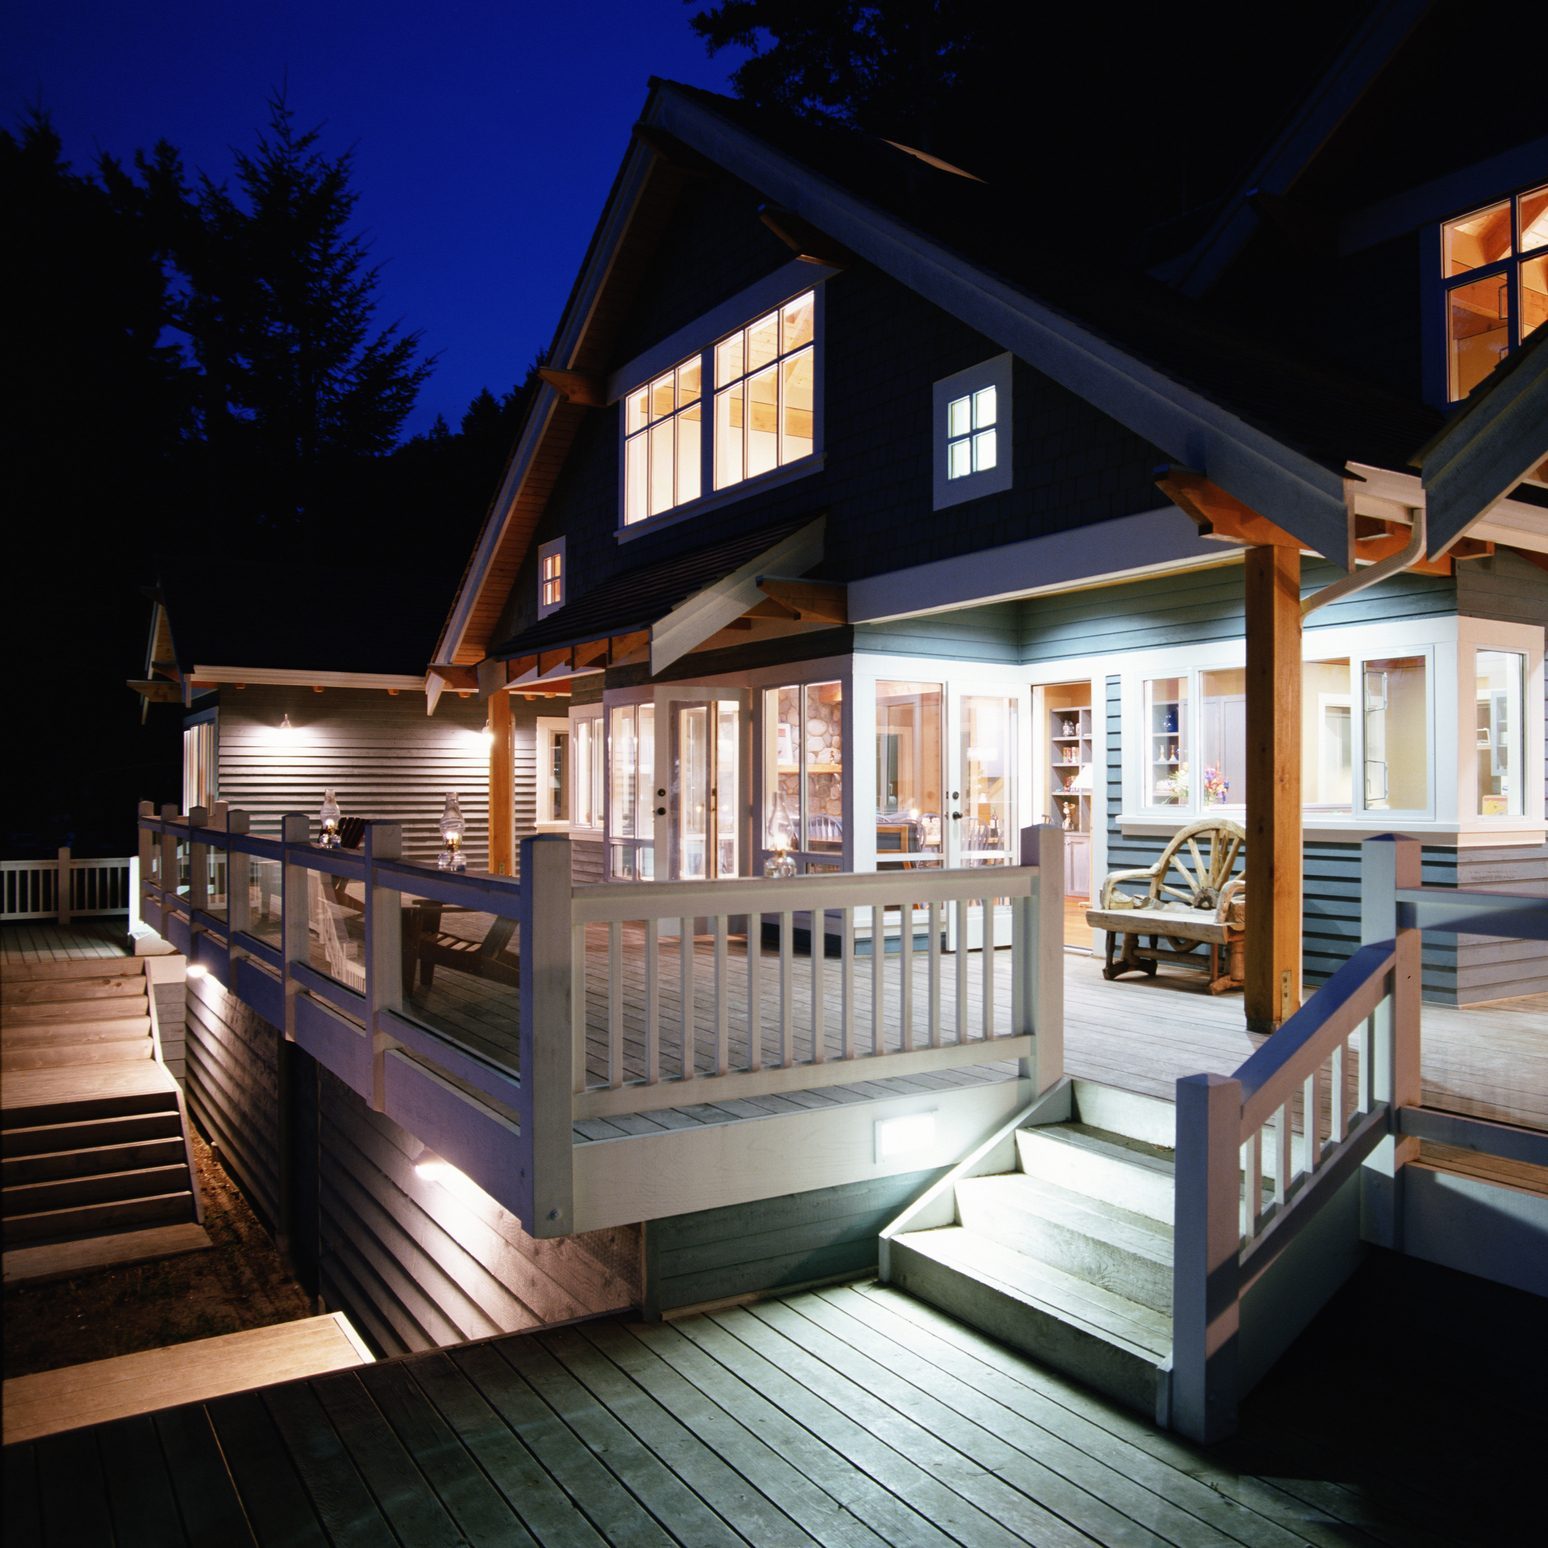 Exterior of house with entrance, decks, and window lit, night